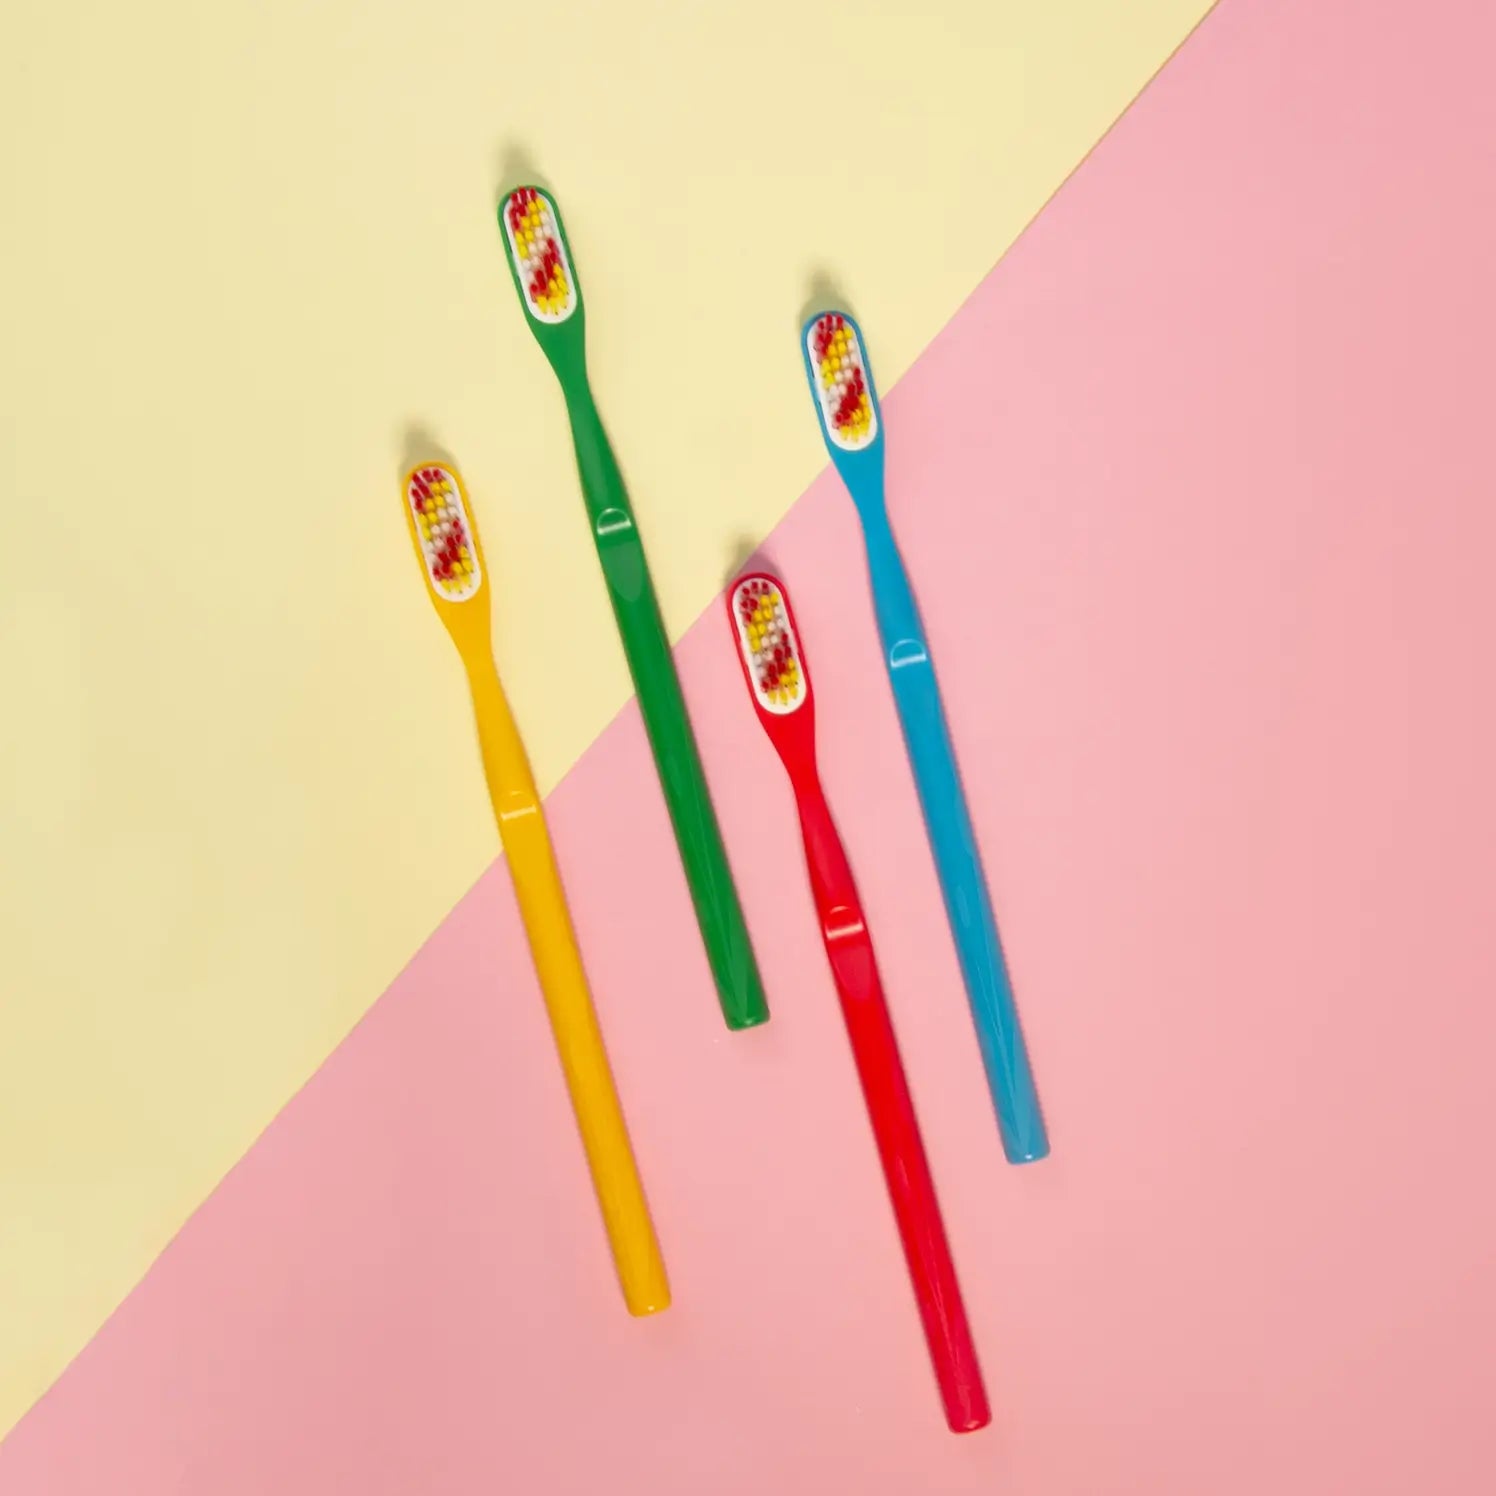 Toothbrush with replaceable-head - Kids